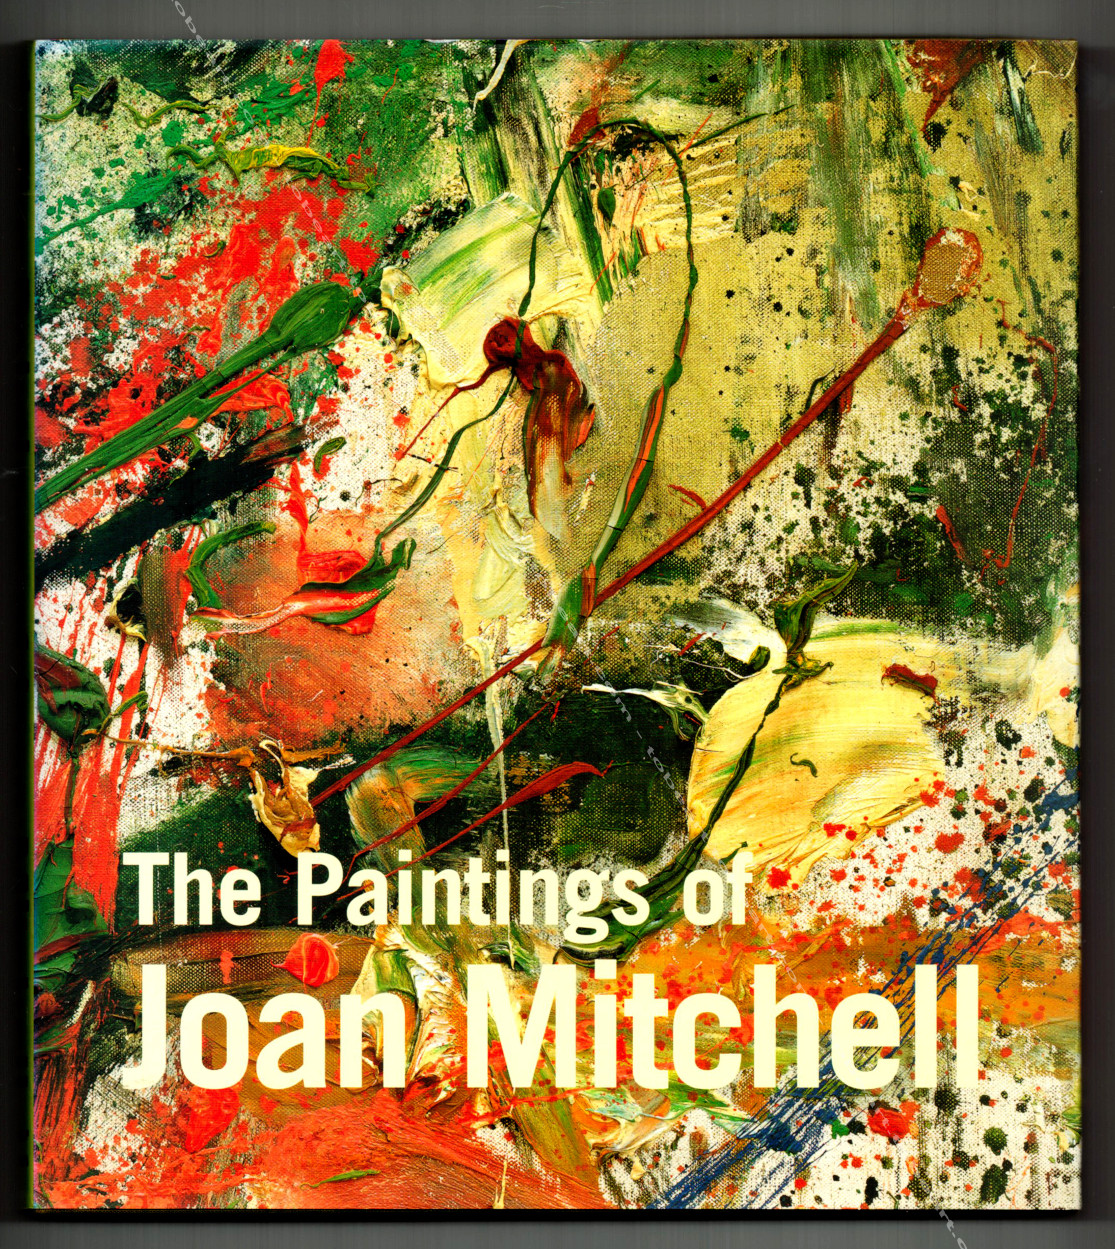 The Paintings of Joan MITCHELL. - [Joan MITCHELL].